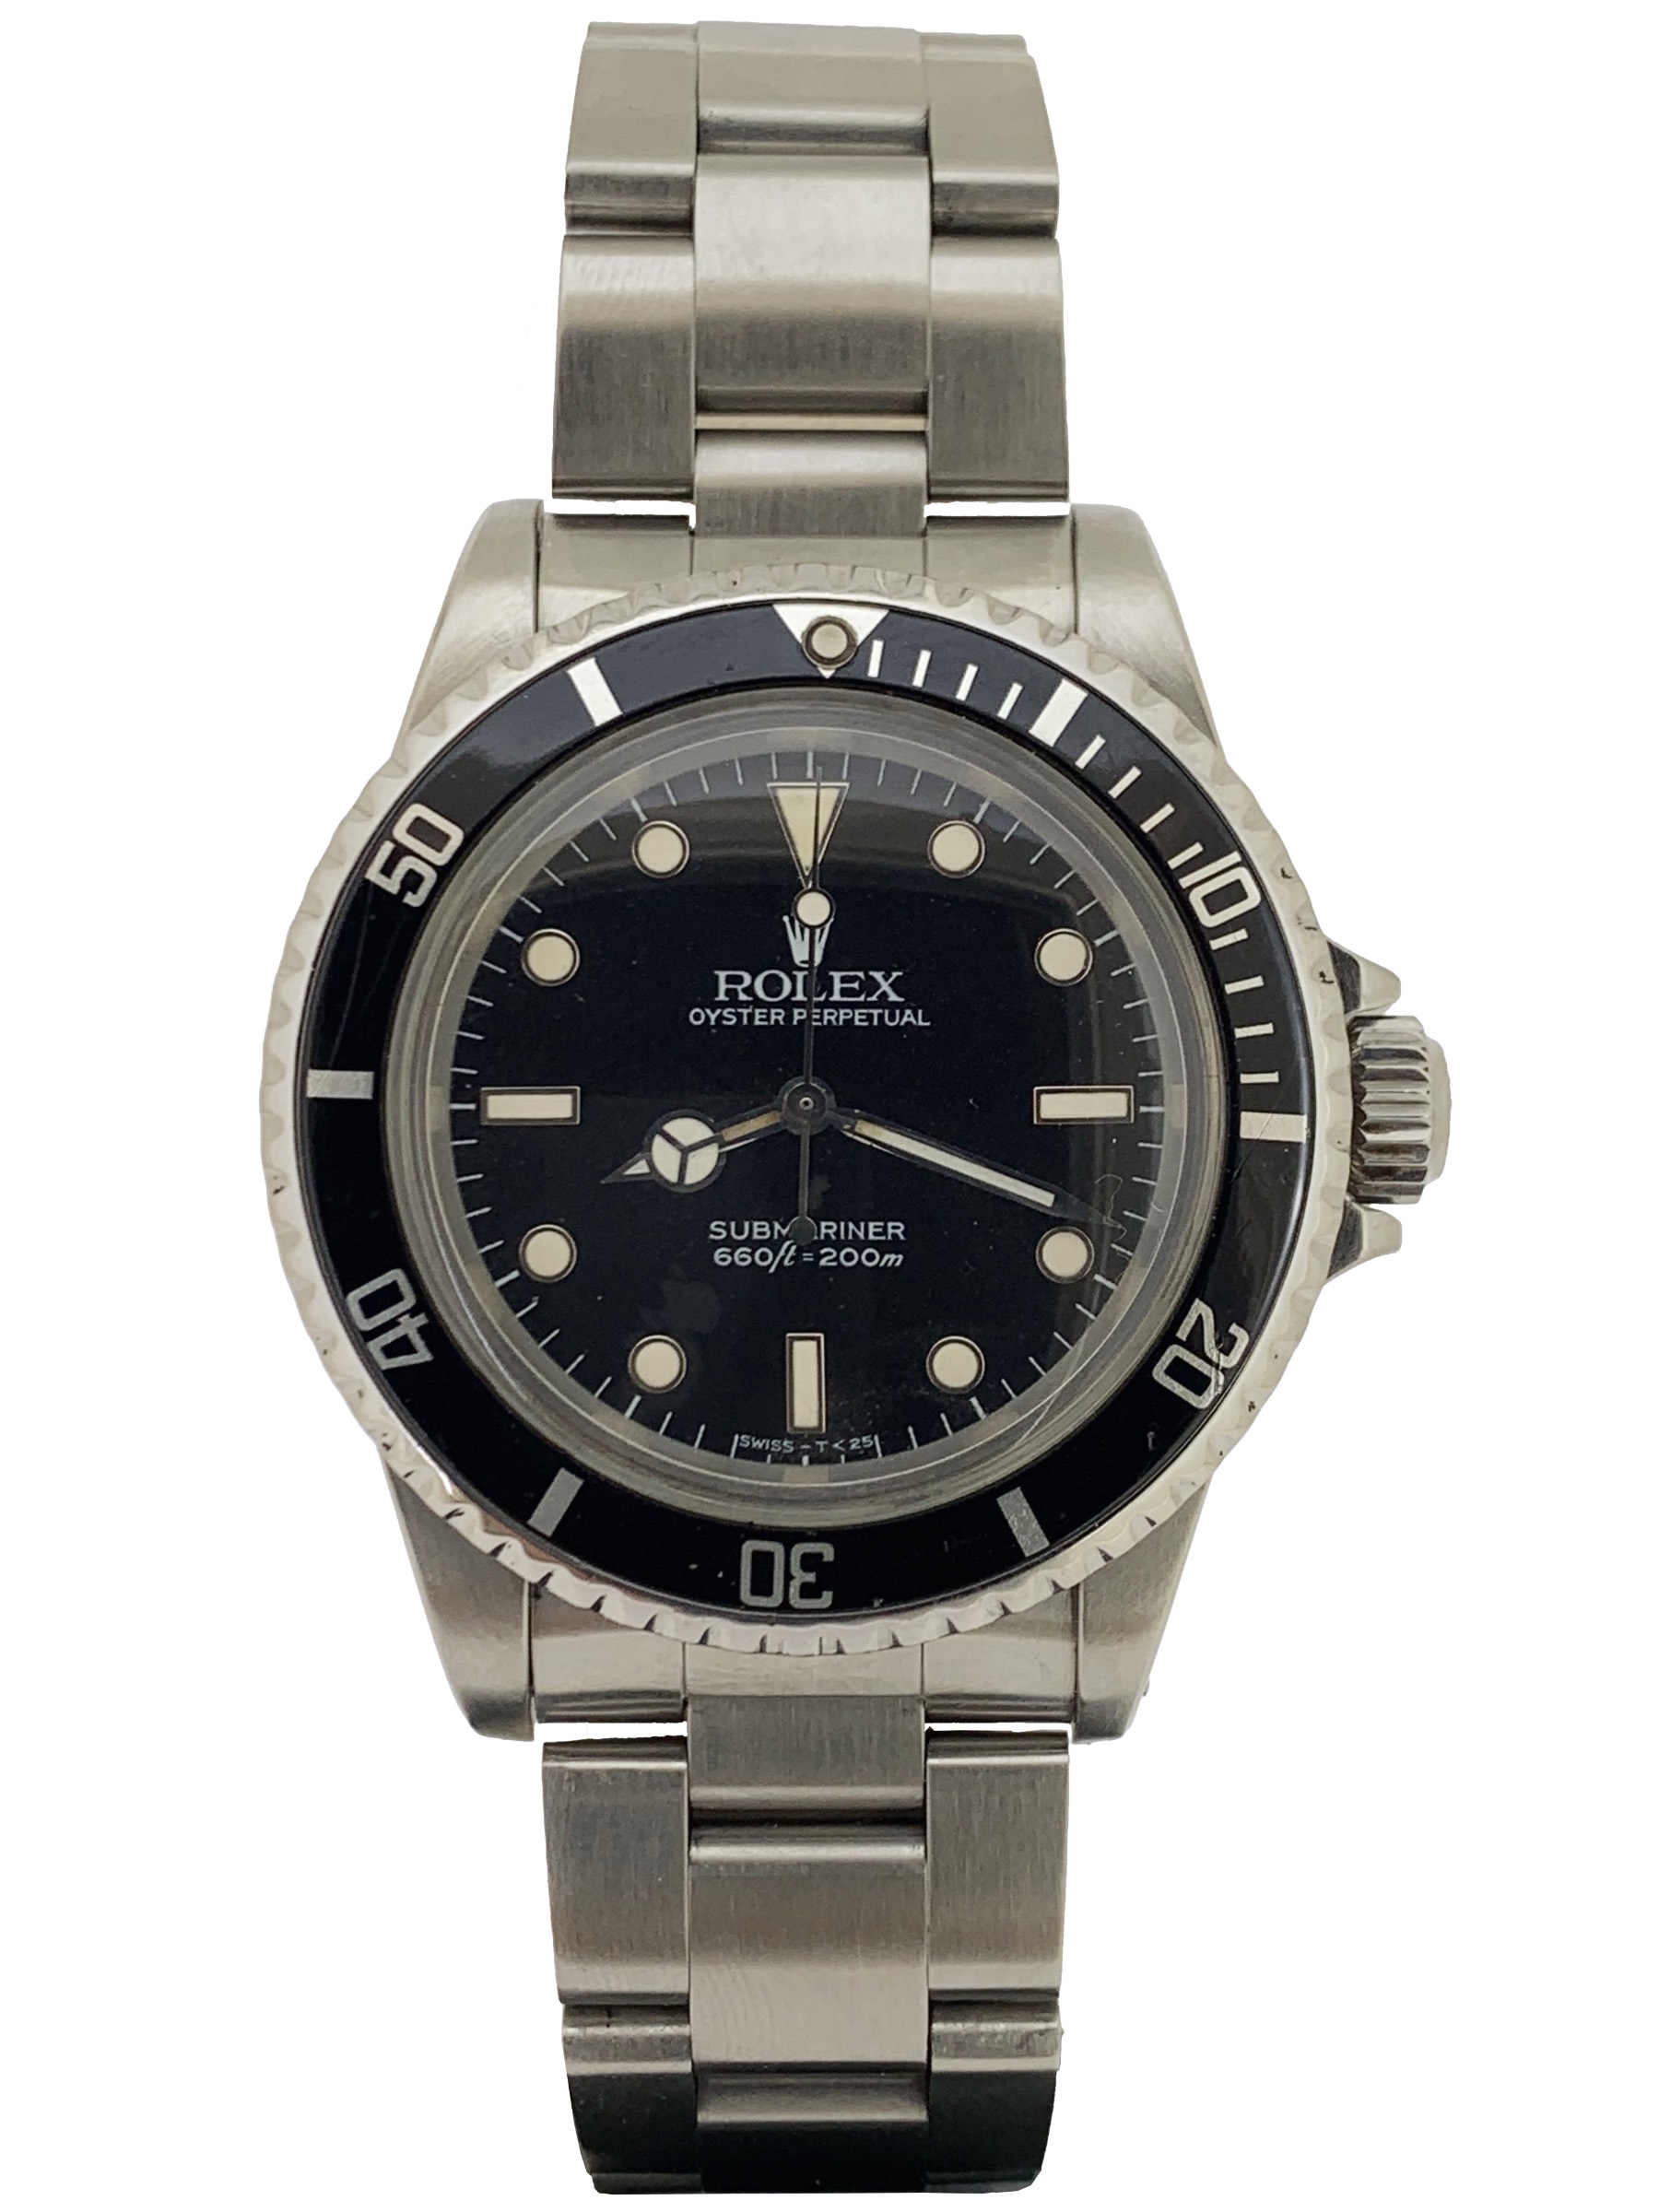 Rolex Submariner 5513 Glossy Dial